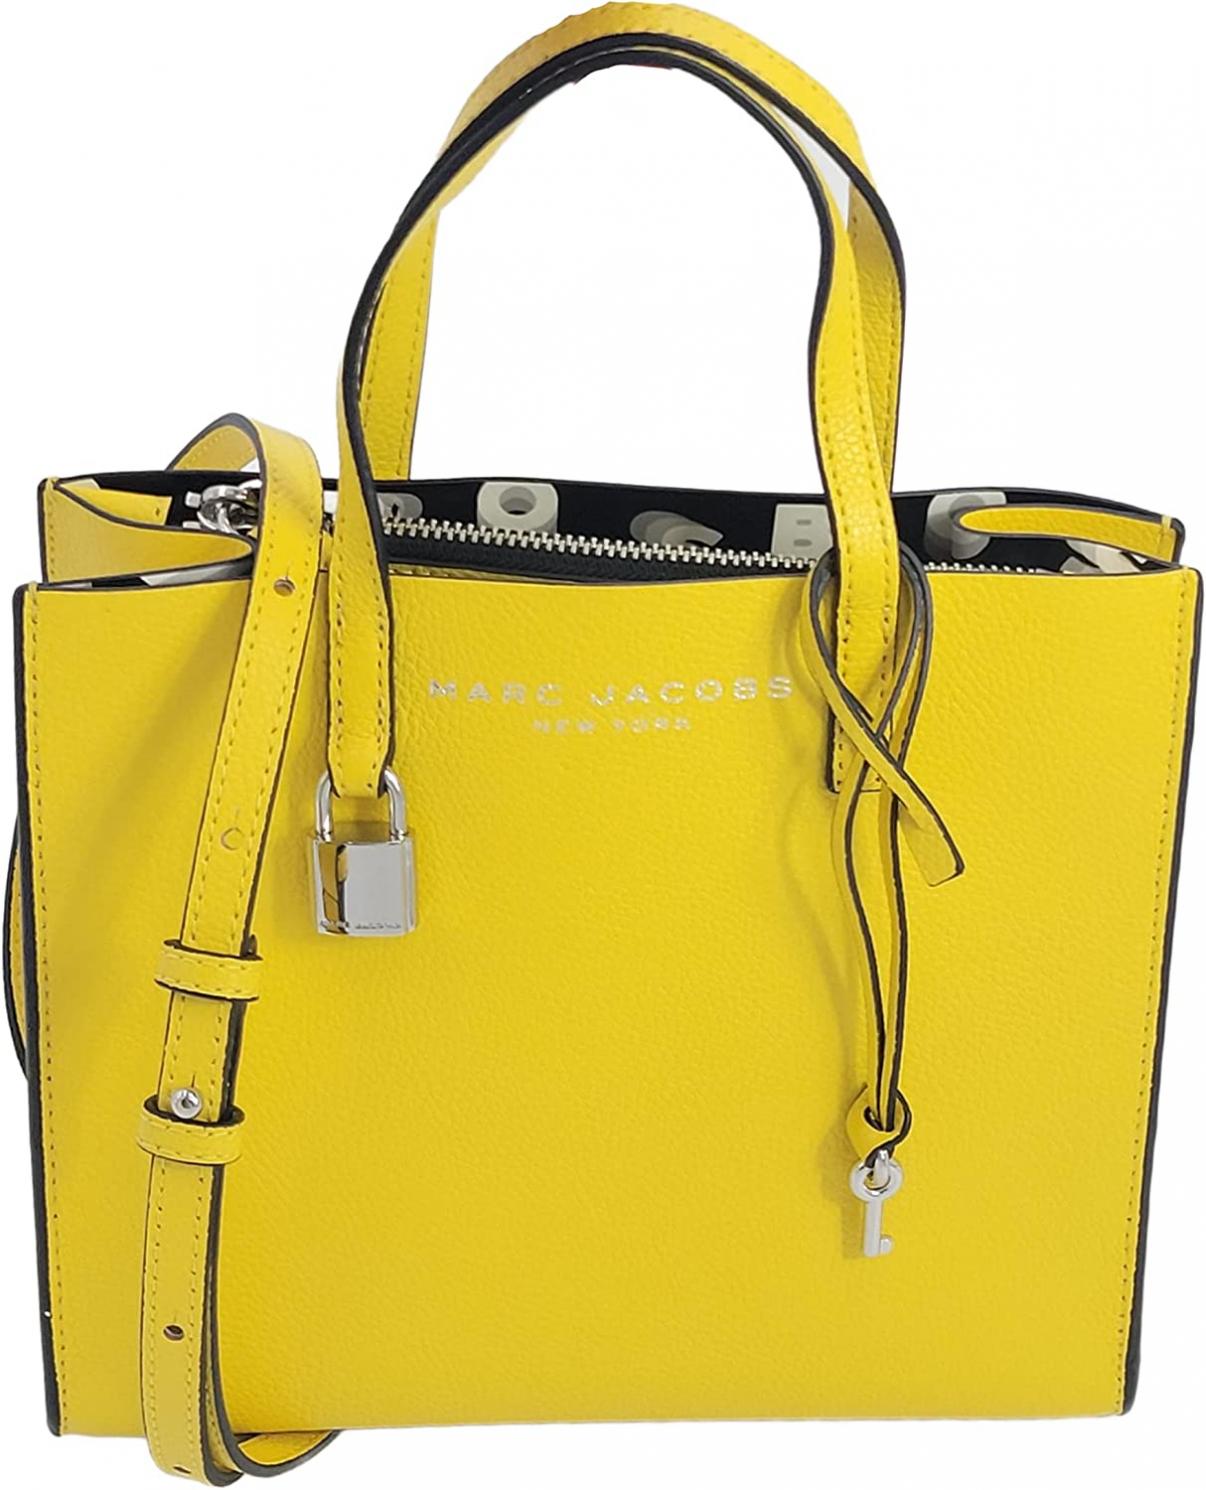 Marc Jacobs M0015685 Hot Spot Yellow With Silver Hardware Small Women's Top Handle/Shoulder Bag